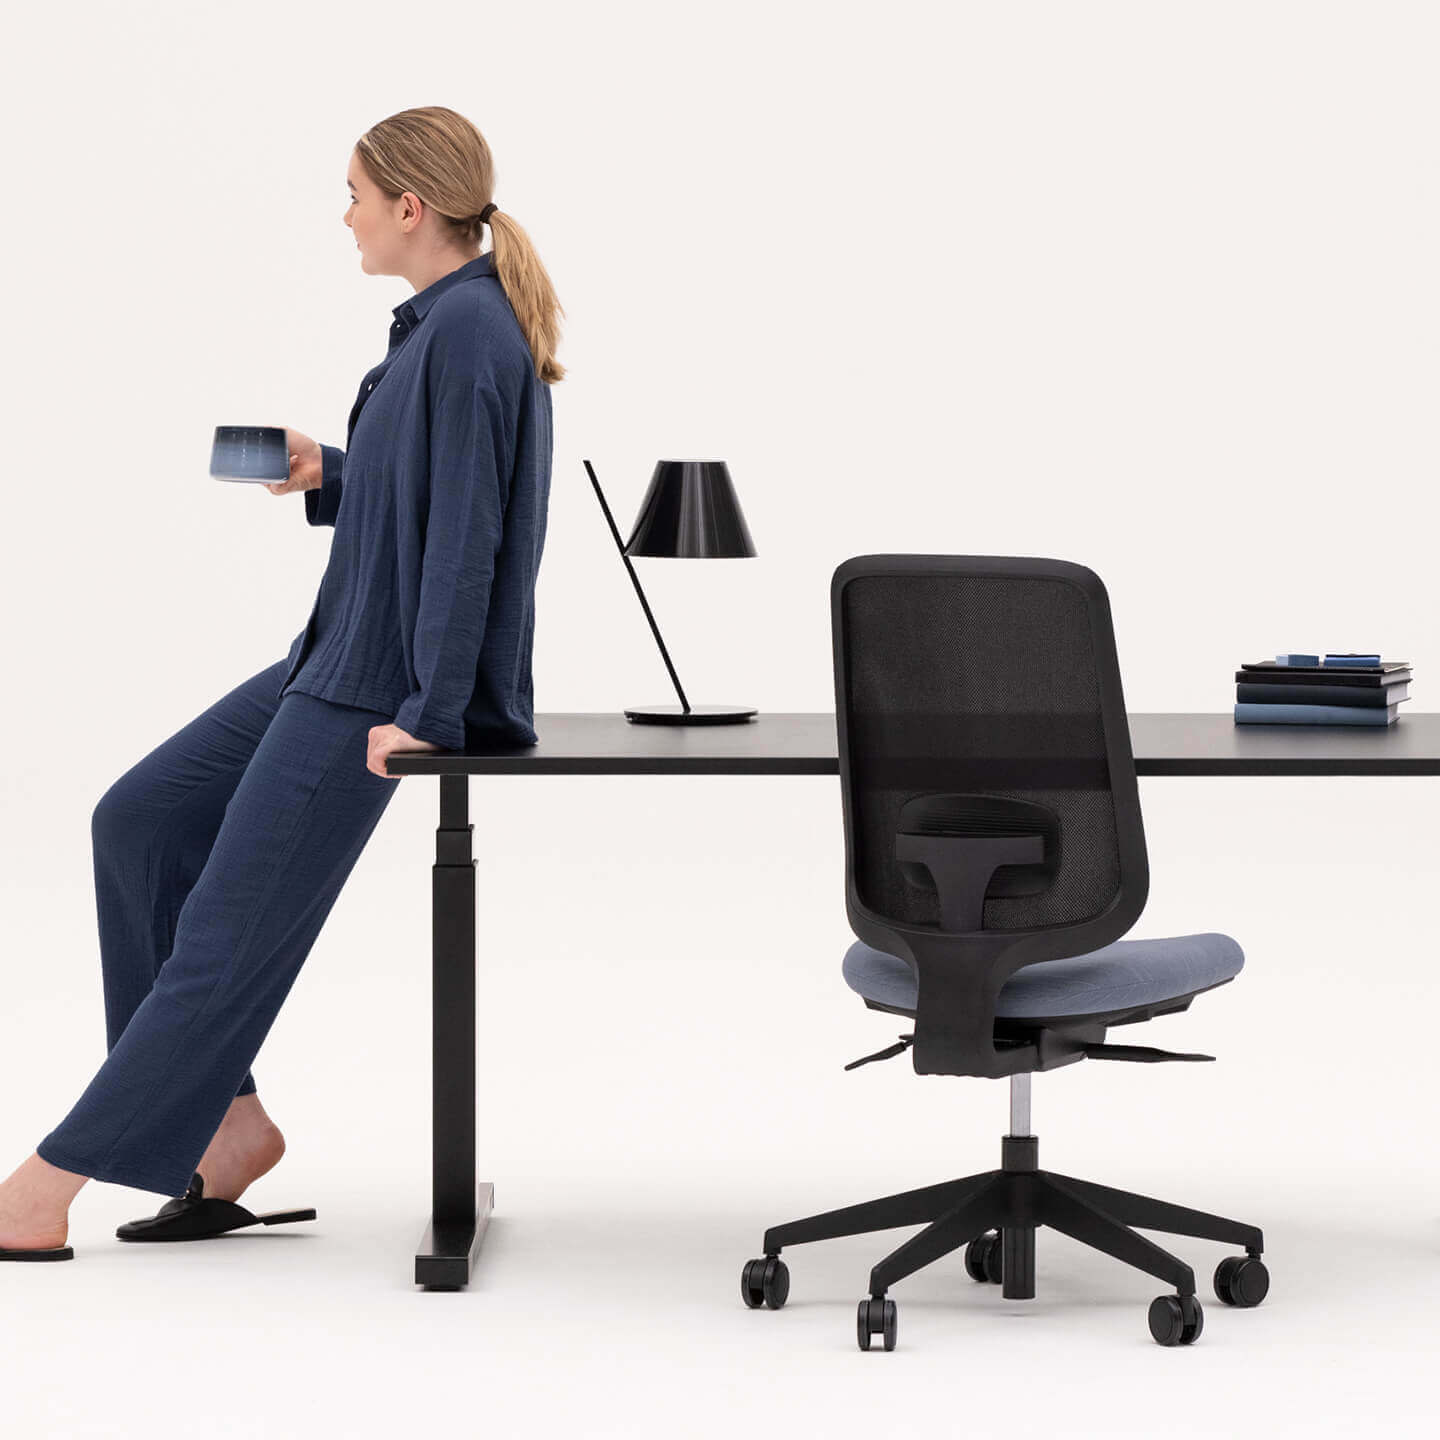 Person Holding a Mug Leaning Against a Height Adjustable Black Frame Desk With Black Top